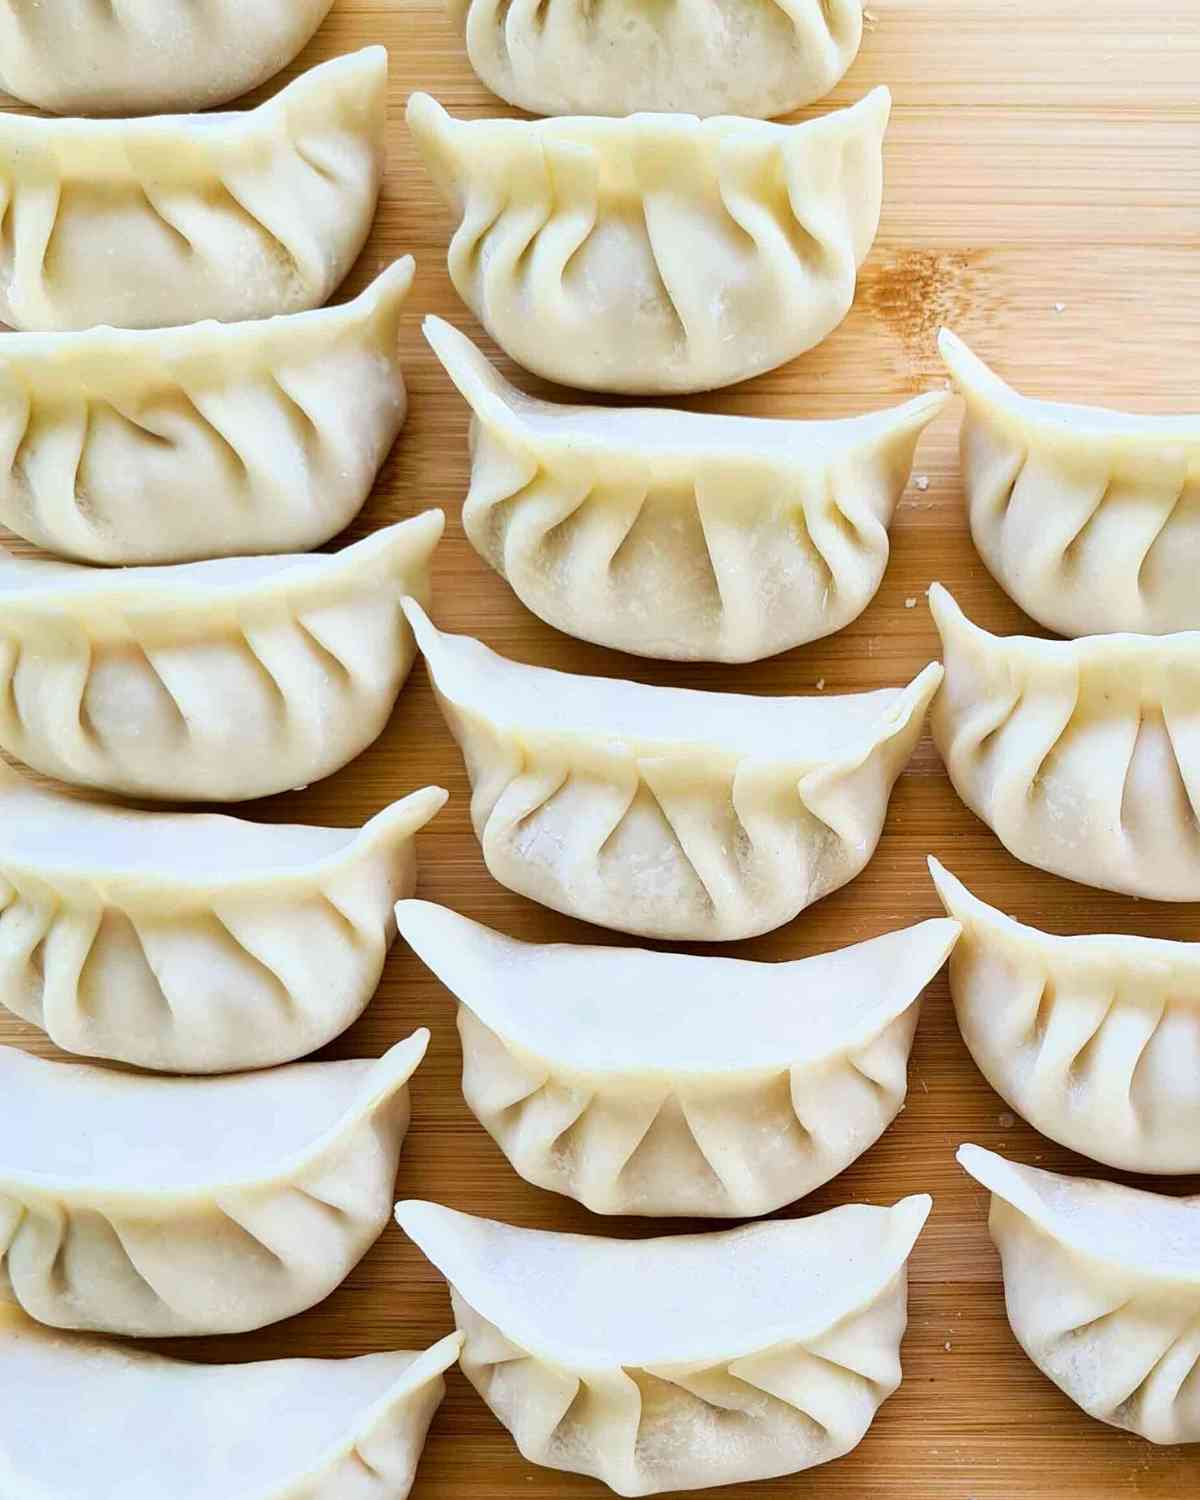 3 rows of neatly pleated dumplings about to be cooked